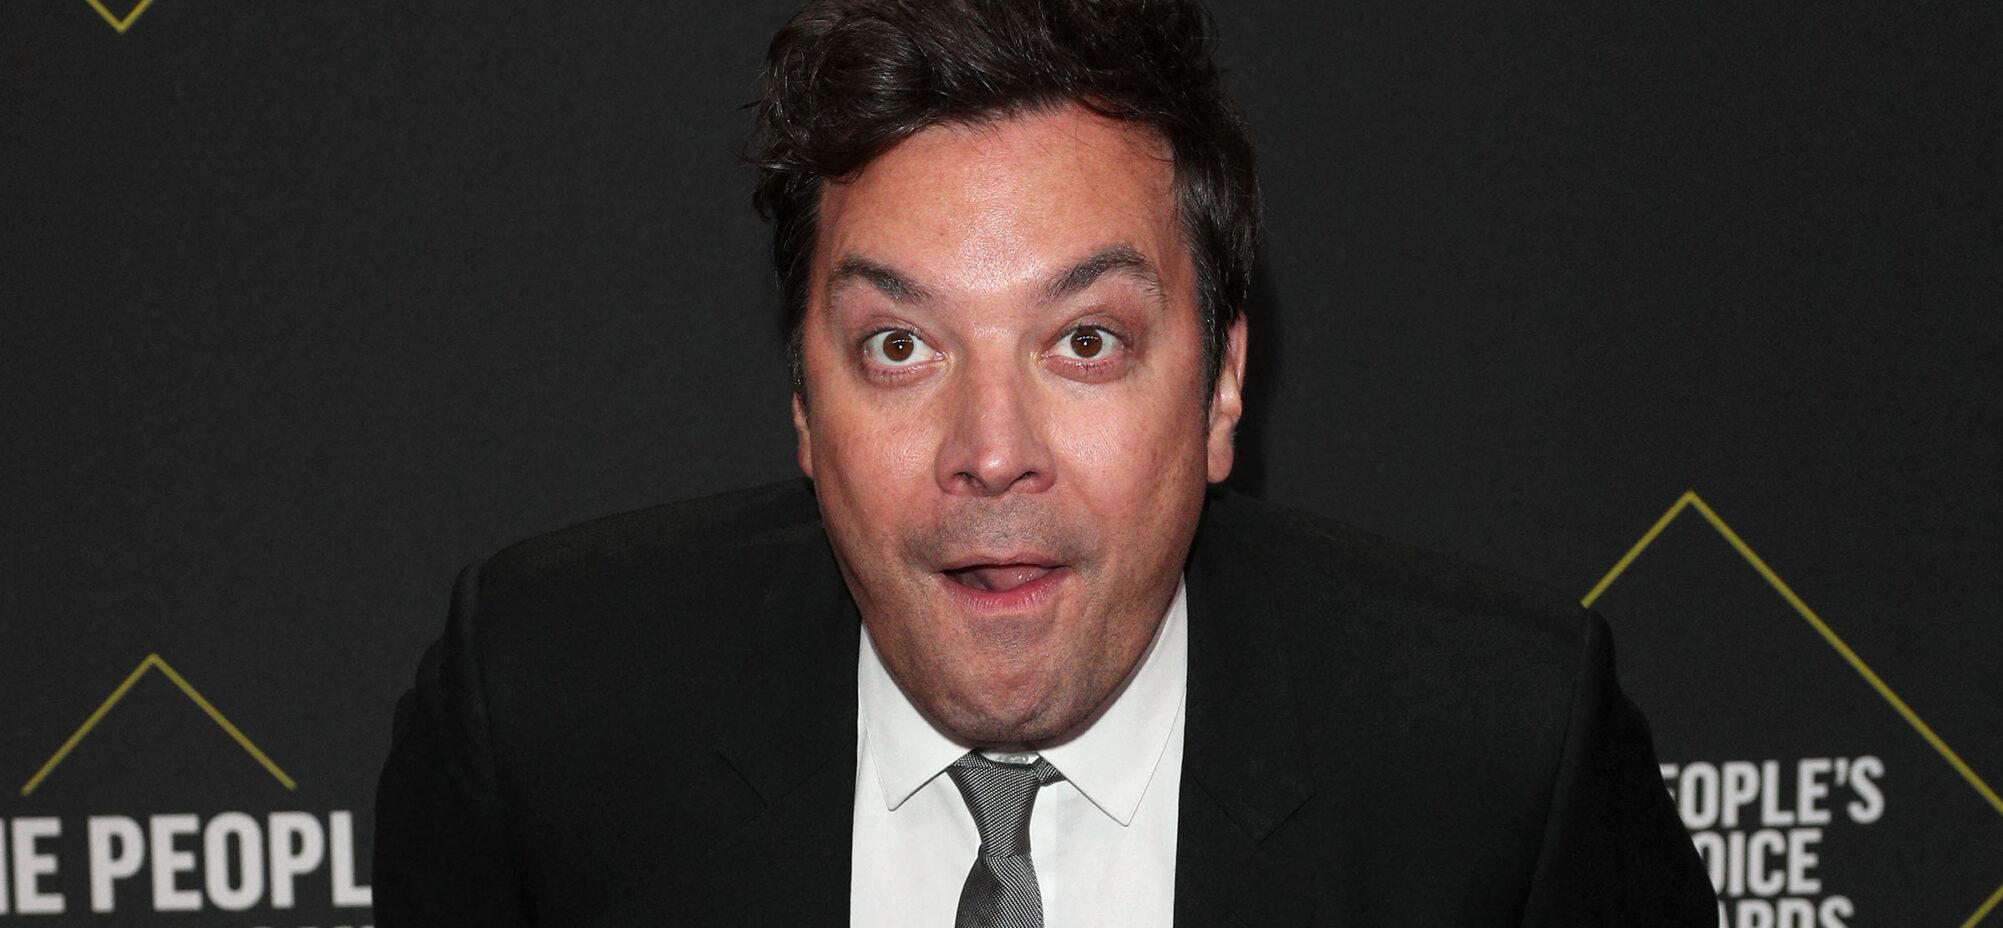 Jimmy Fallon accused of creating a hostile work environment on 'The Tonight Show'